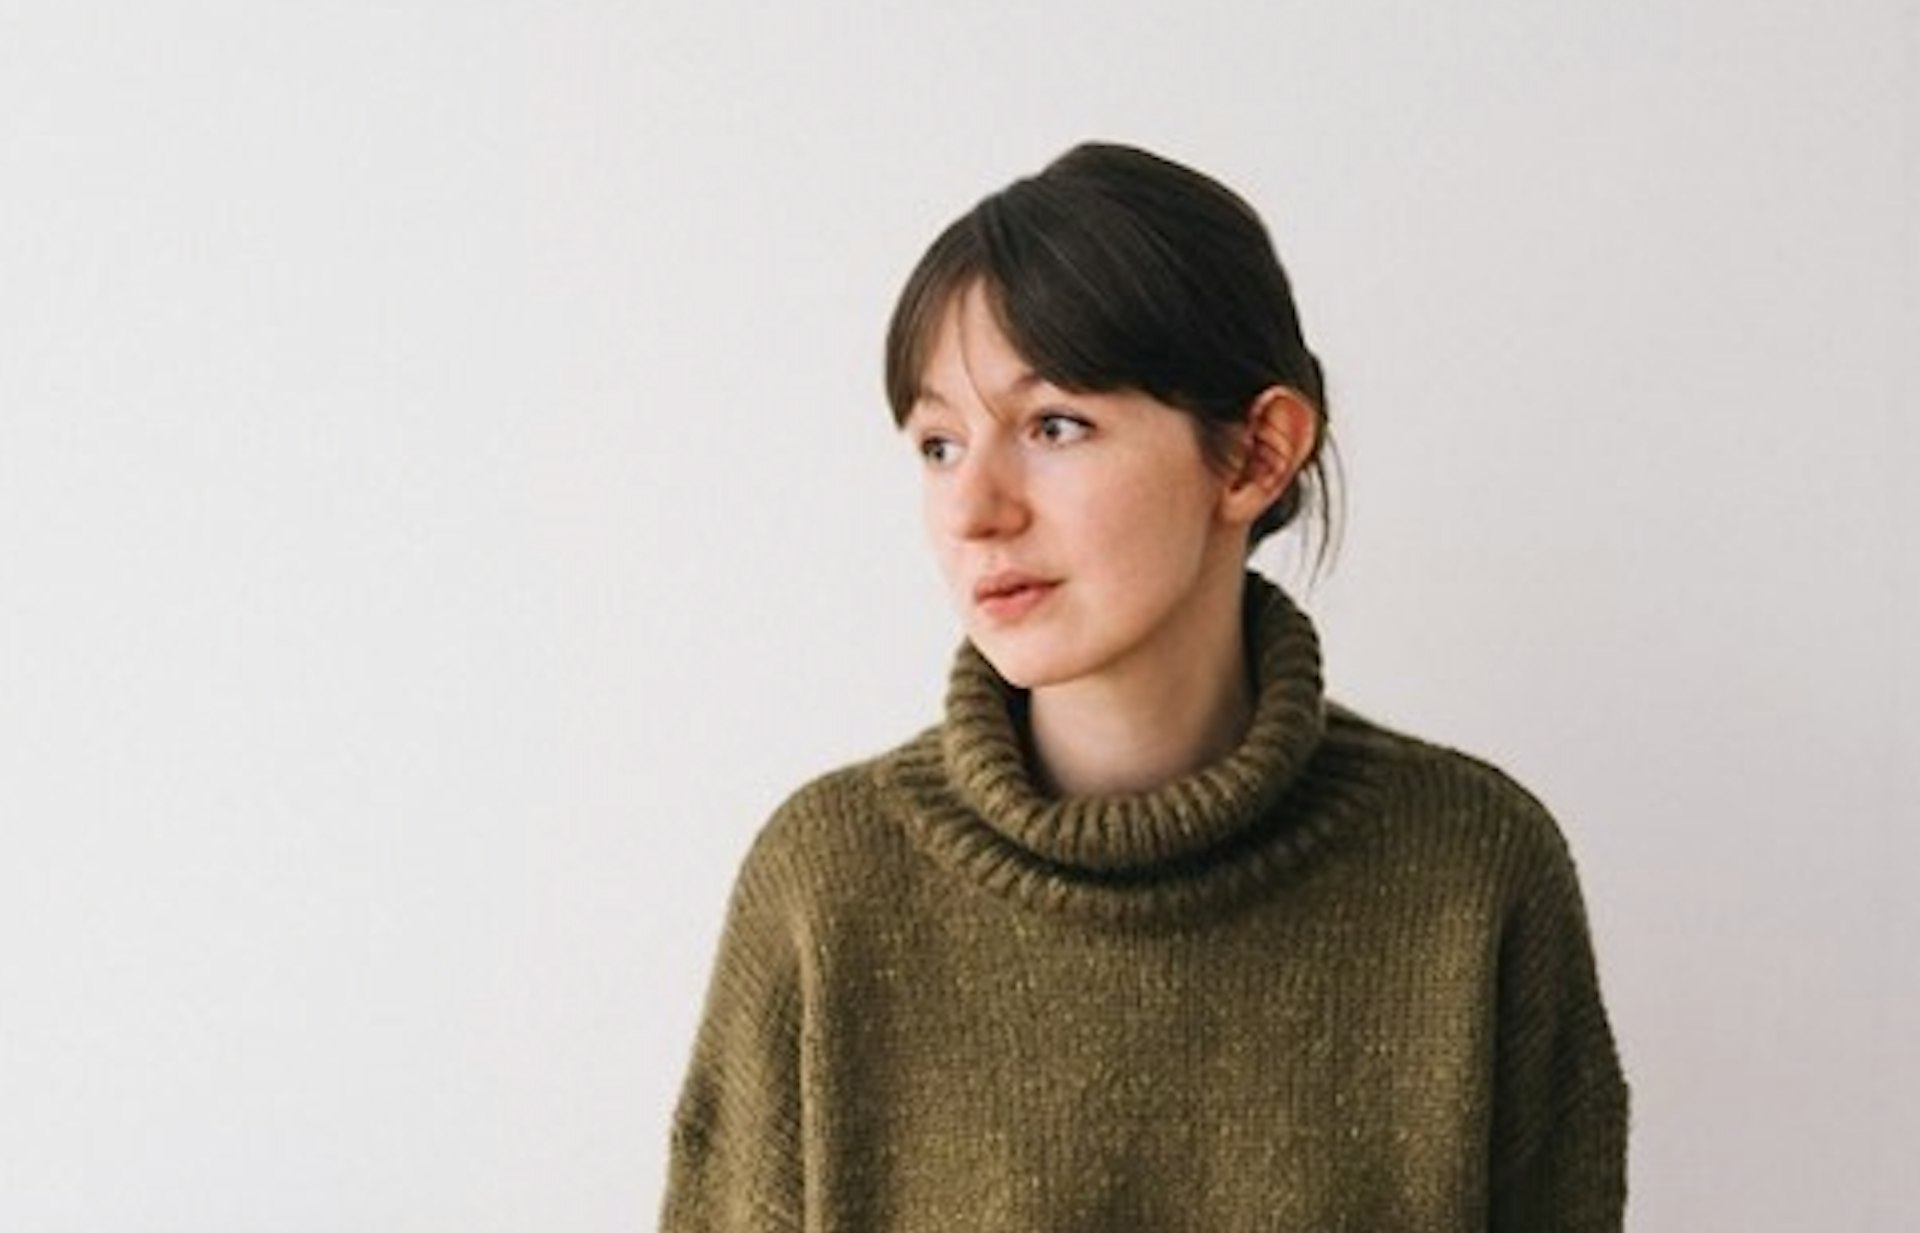 Sally Rooney’s solidarity with Palestine should be celebrated